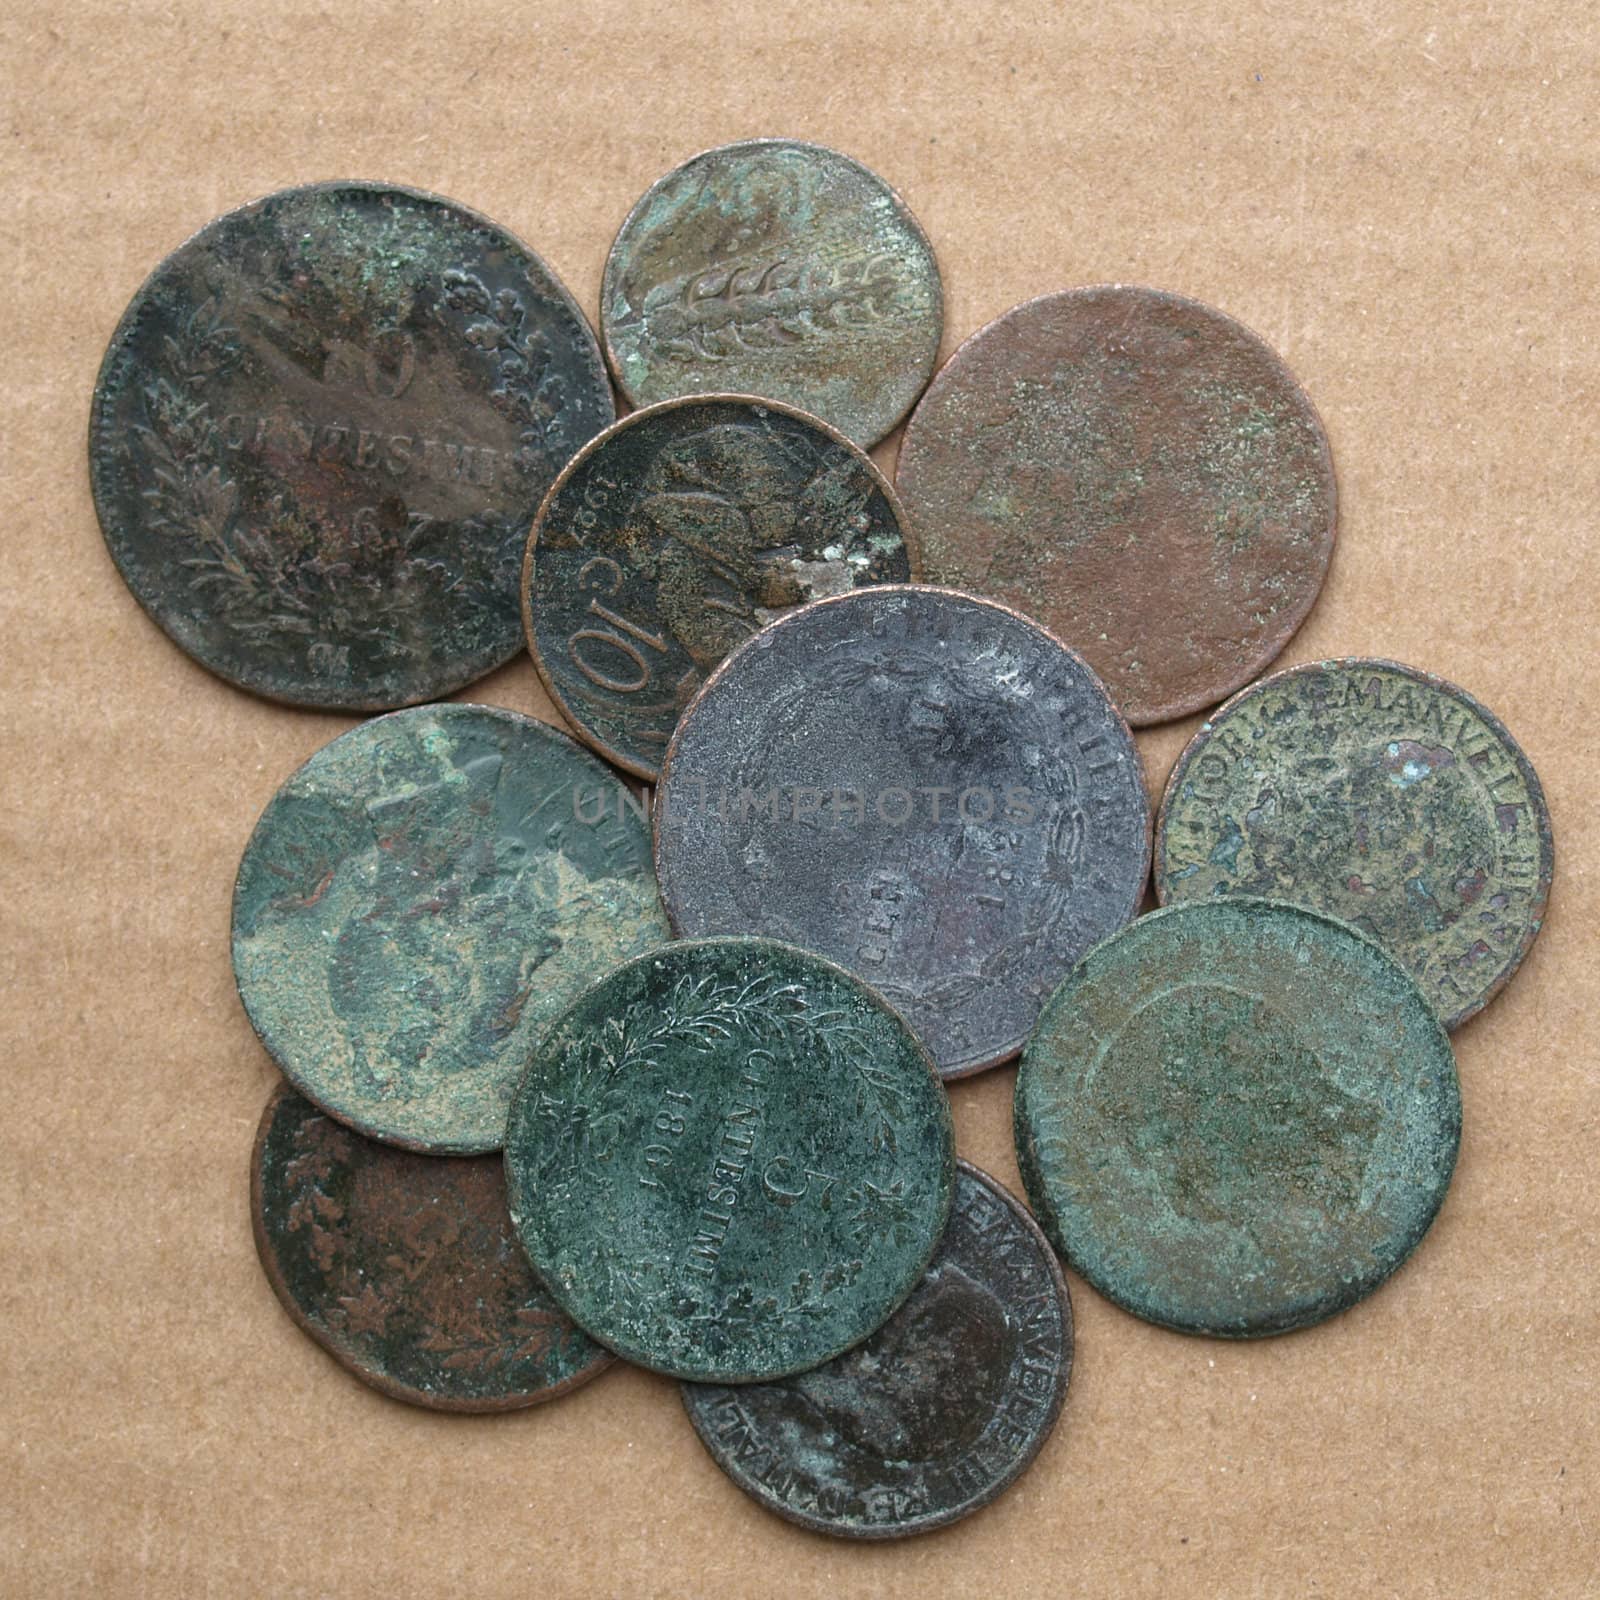 A heap of many ancient rusted coins